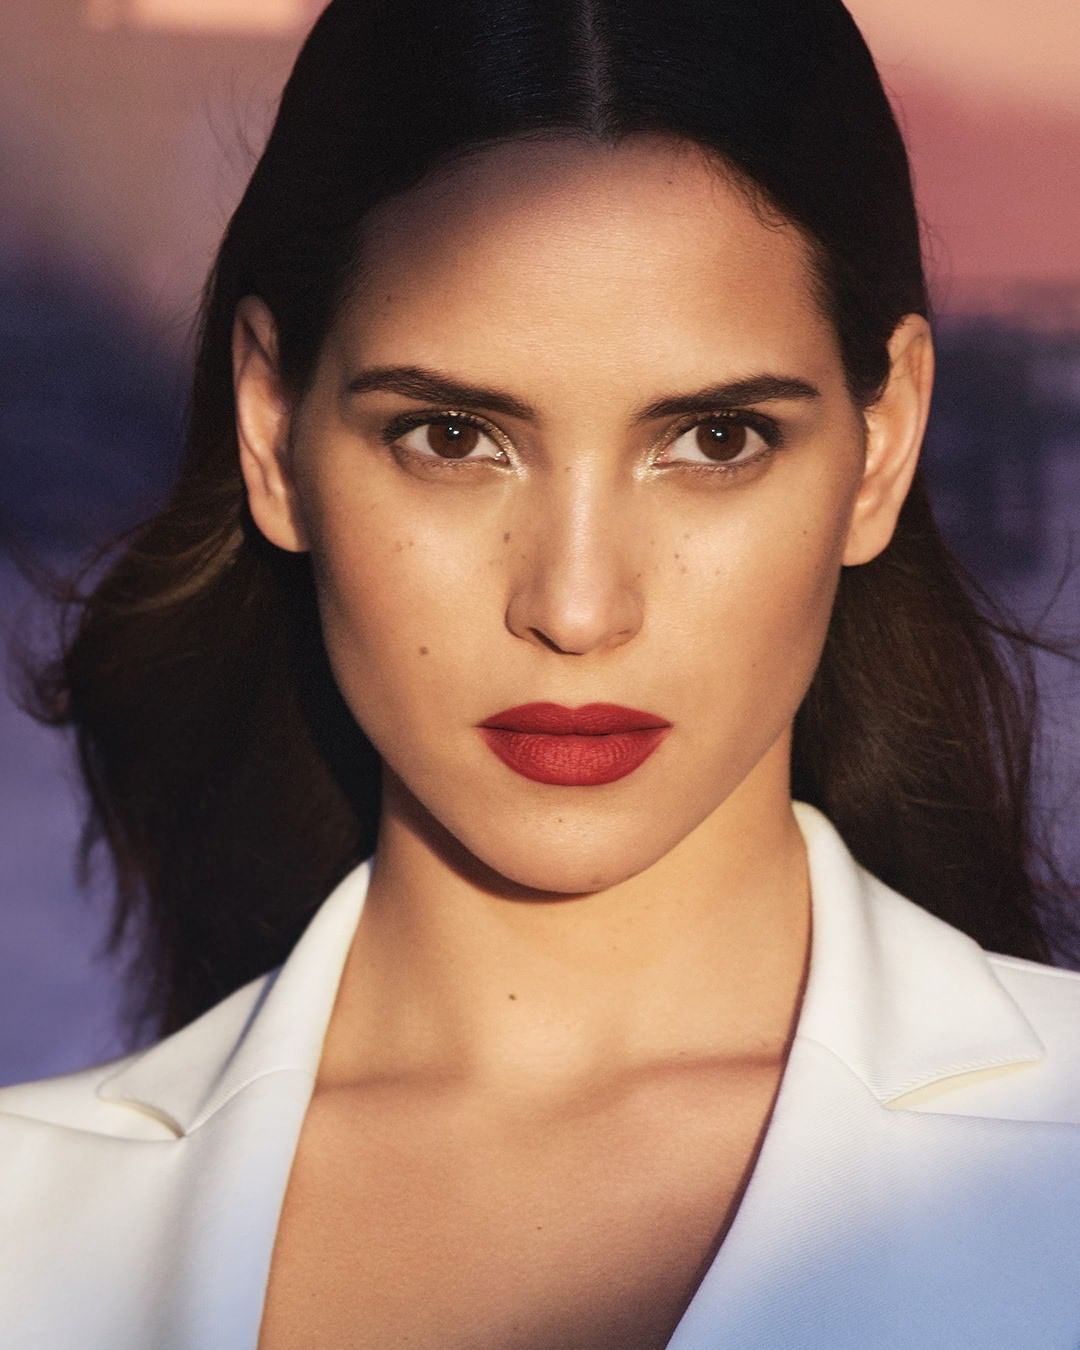 Armani beauty - Intense matte lip color with a touch of cinematic glamour. Actress and face of new fragrance MY WAY @AdriaArjona wears ROUGE D'ARMANI MATTE in shade 406 "Mostra" from the VENEZIA COLLE...